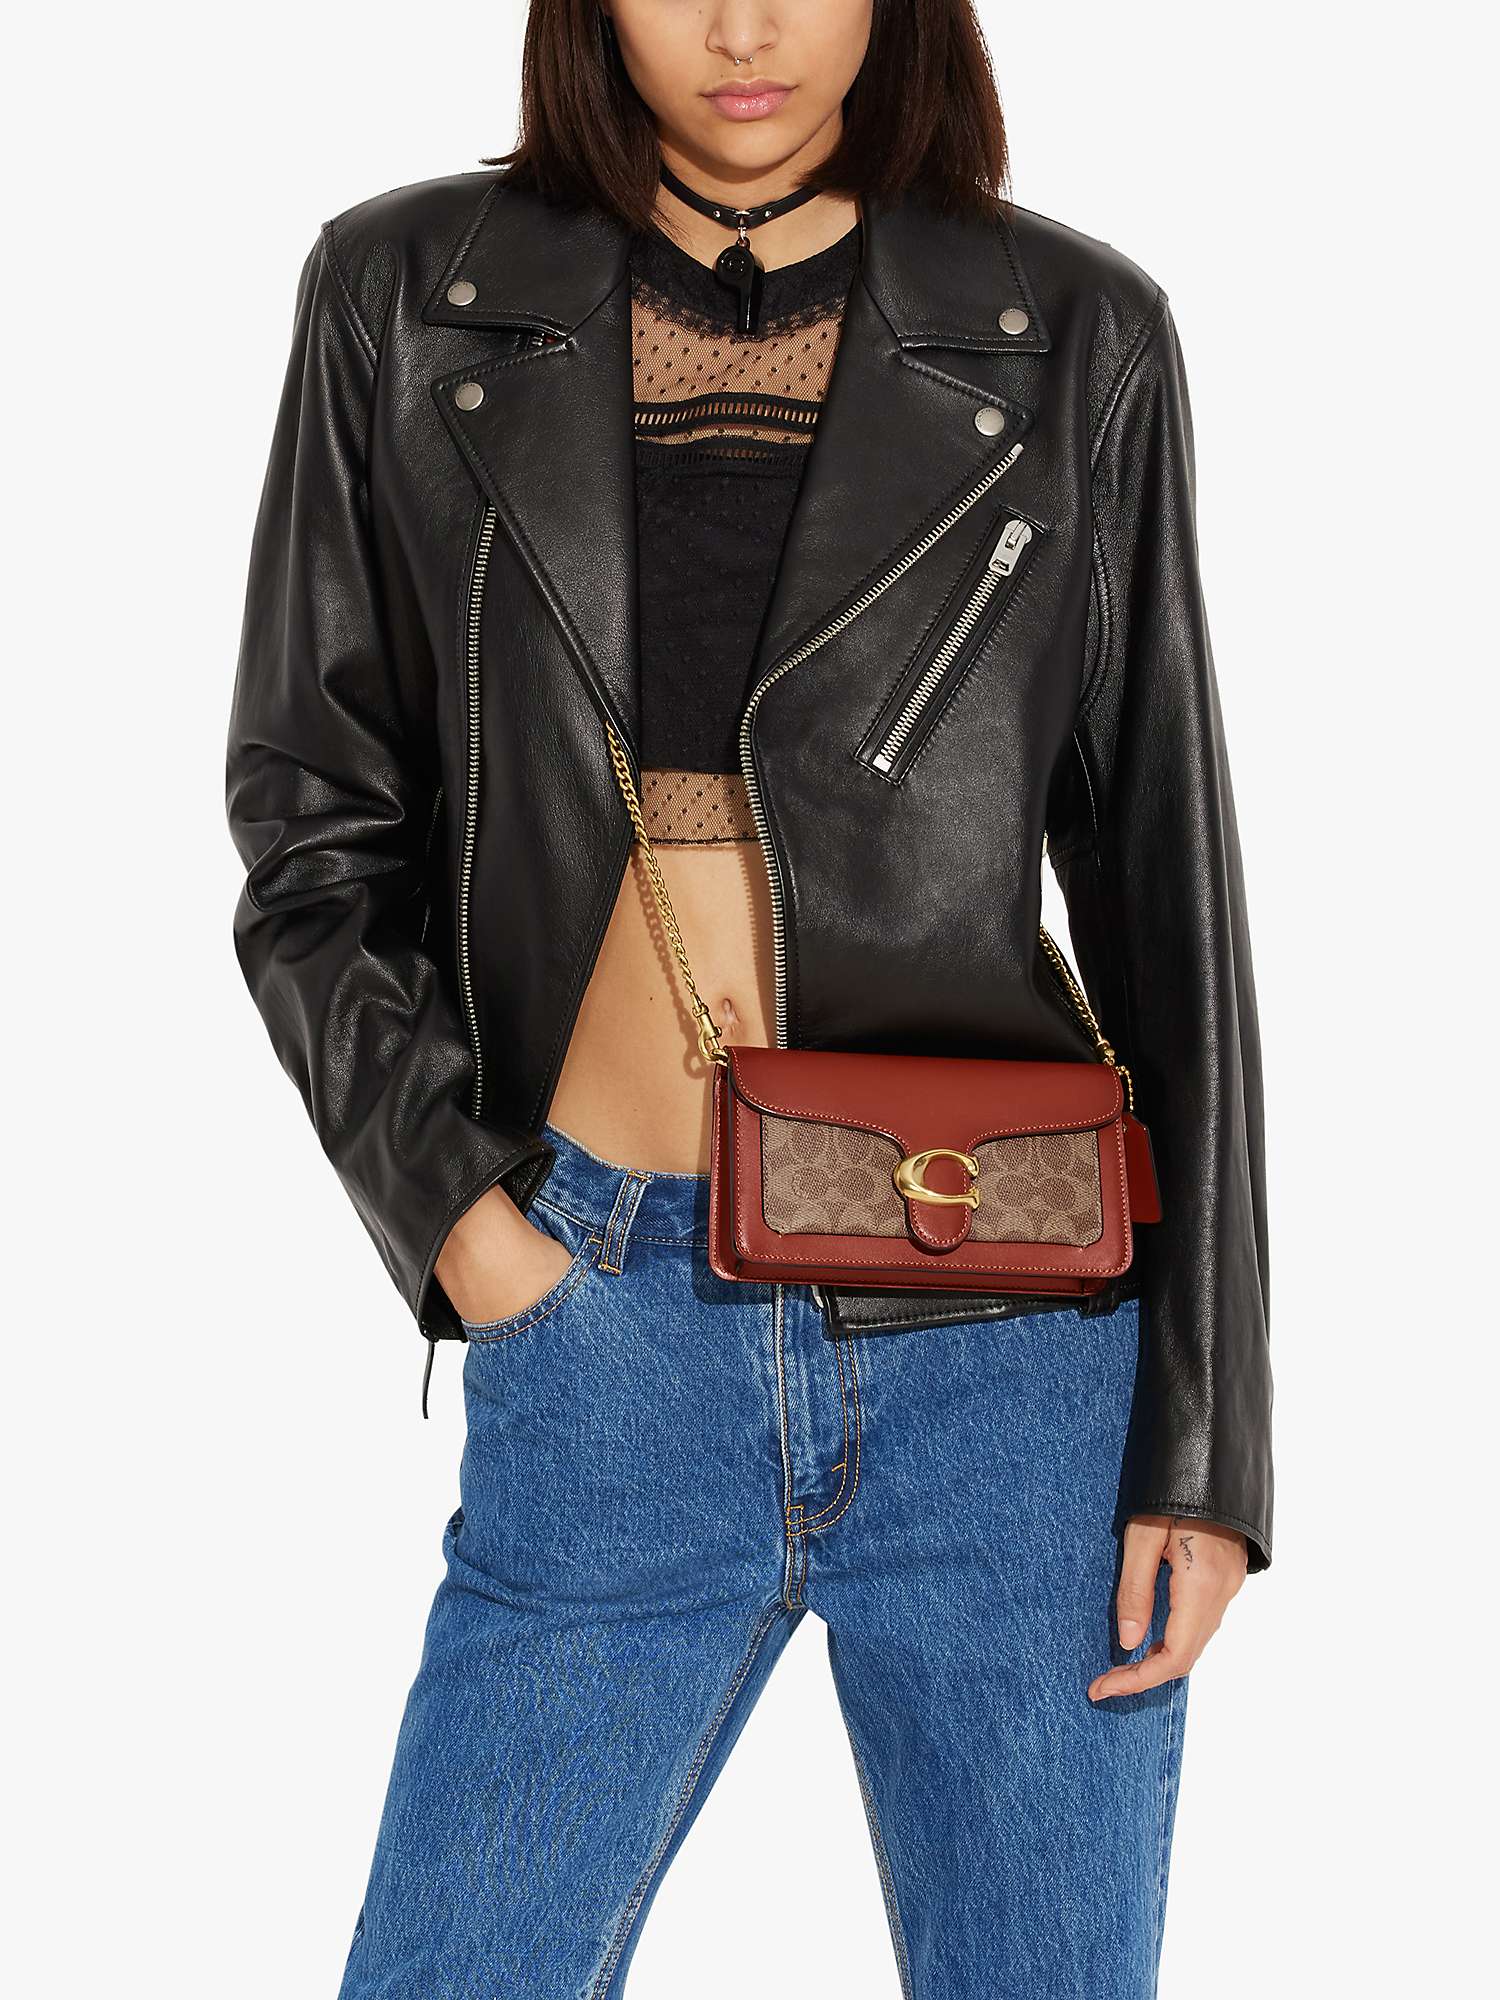 Buy Coach Tabby Signautre Canvas Chain Clutch Bag Online at johnlewis.com